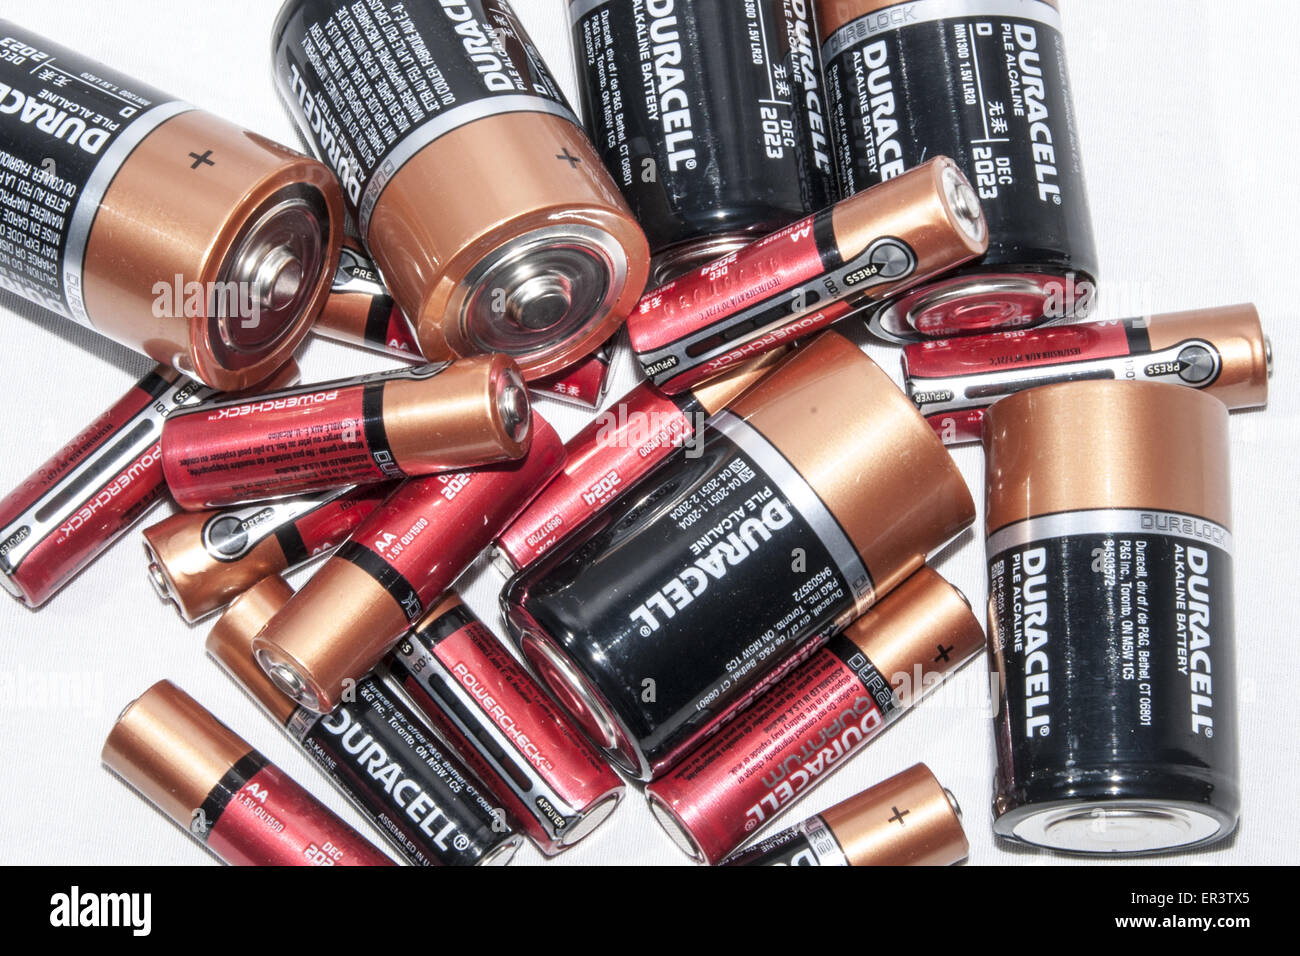 Duracell Pile Rechargeable C x 6 Accu : : High-Tech